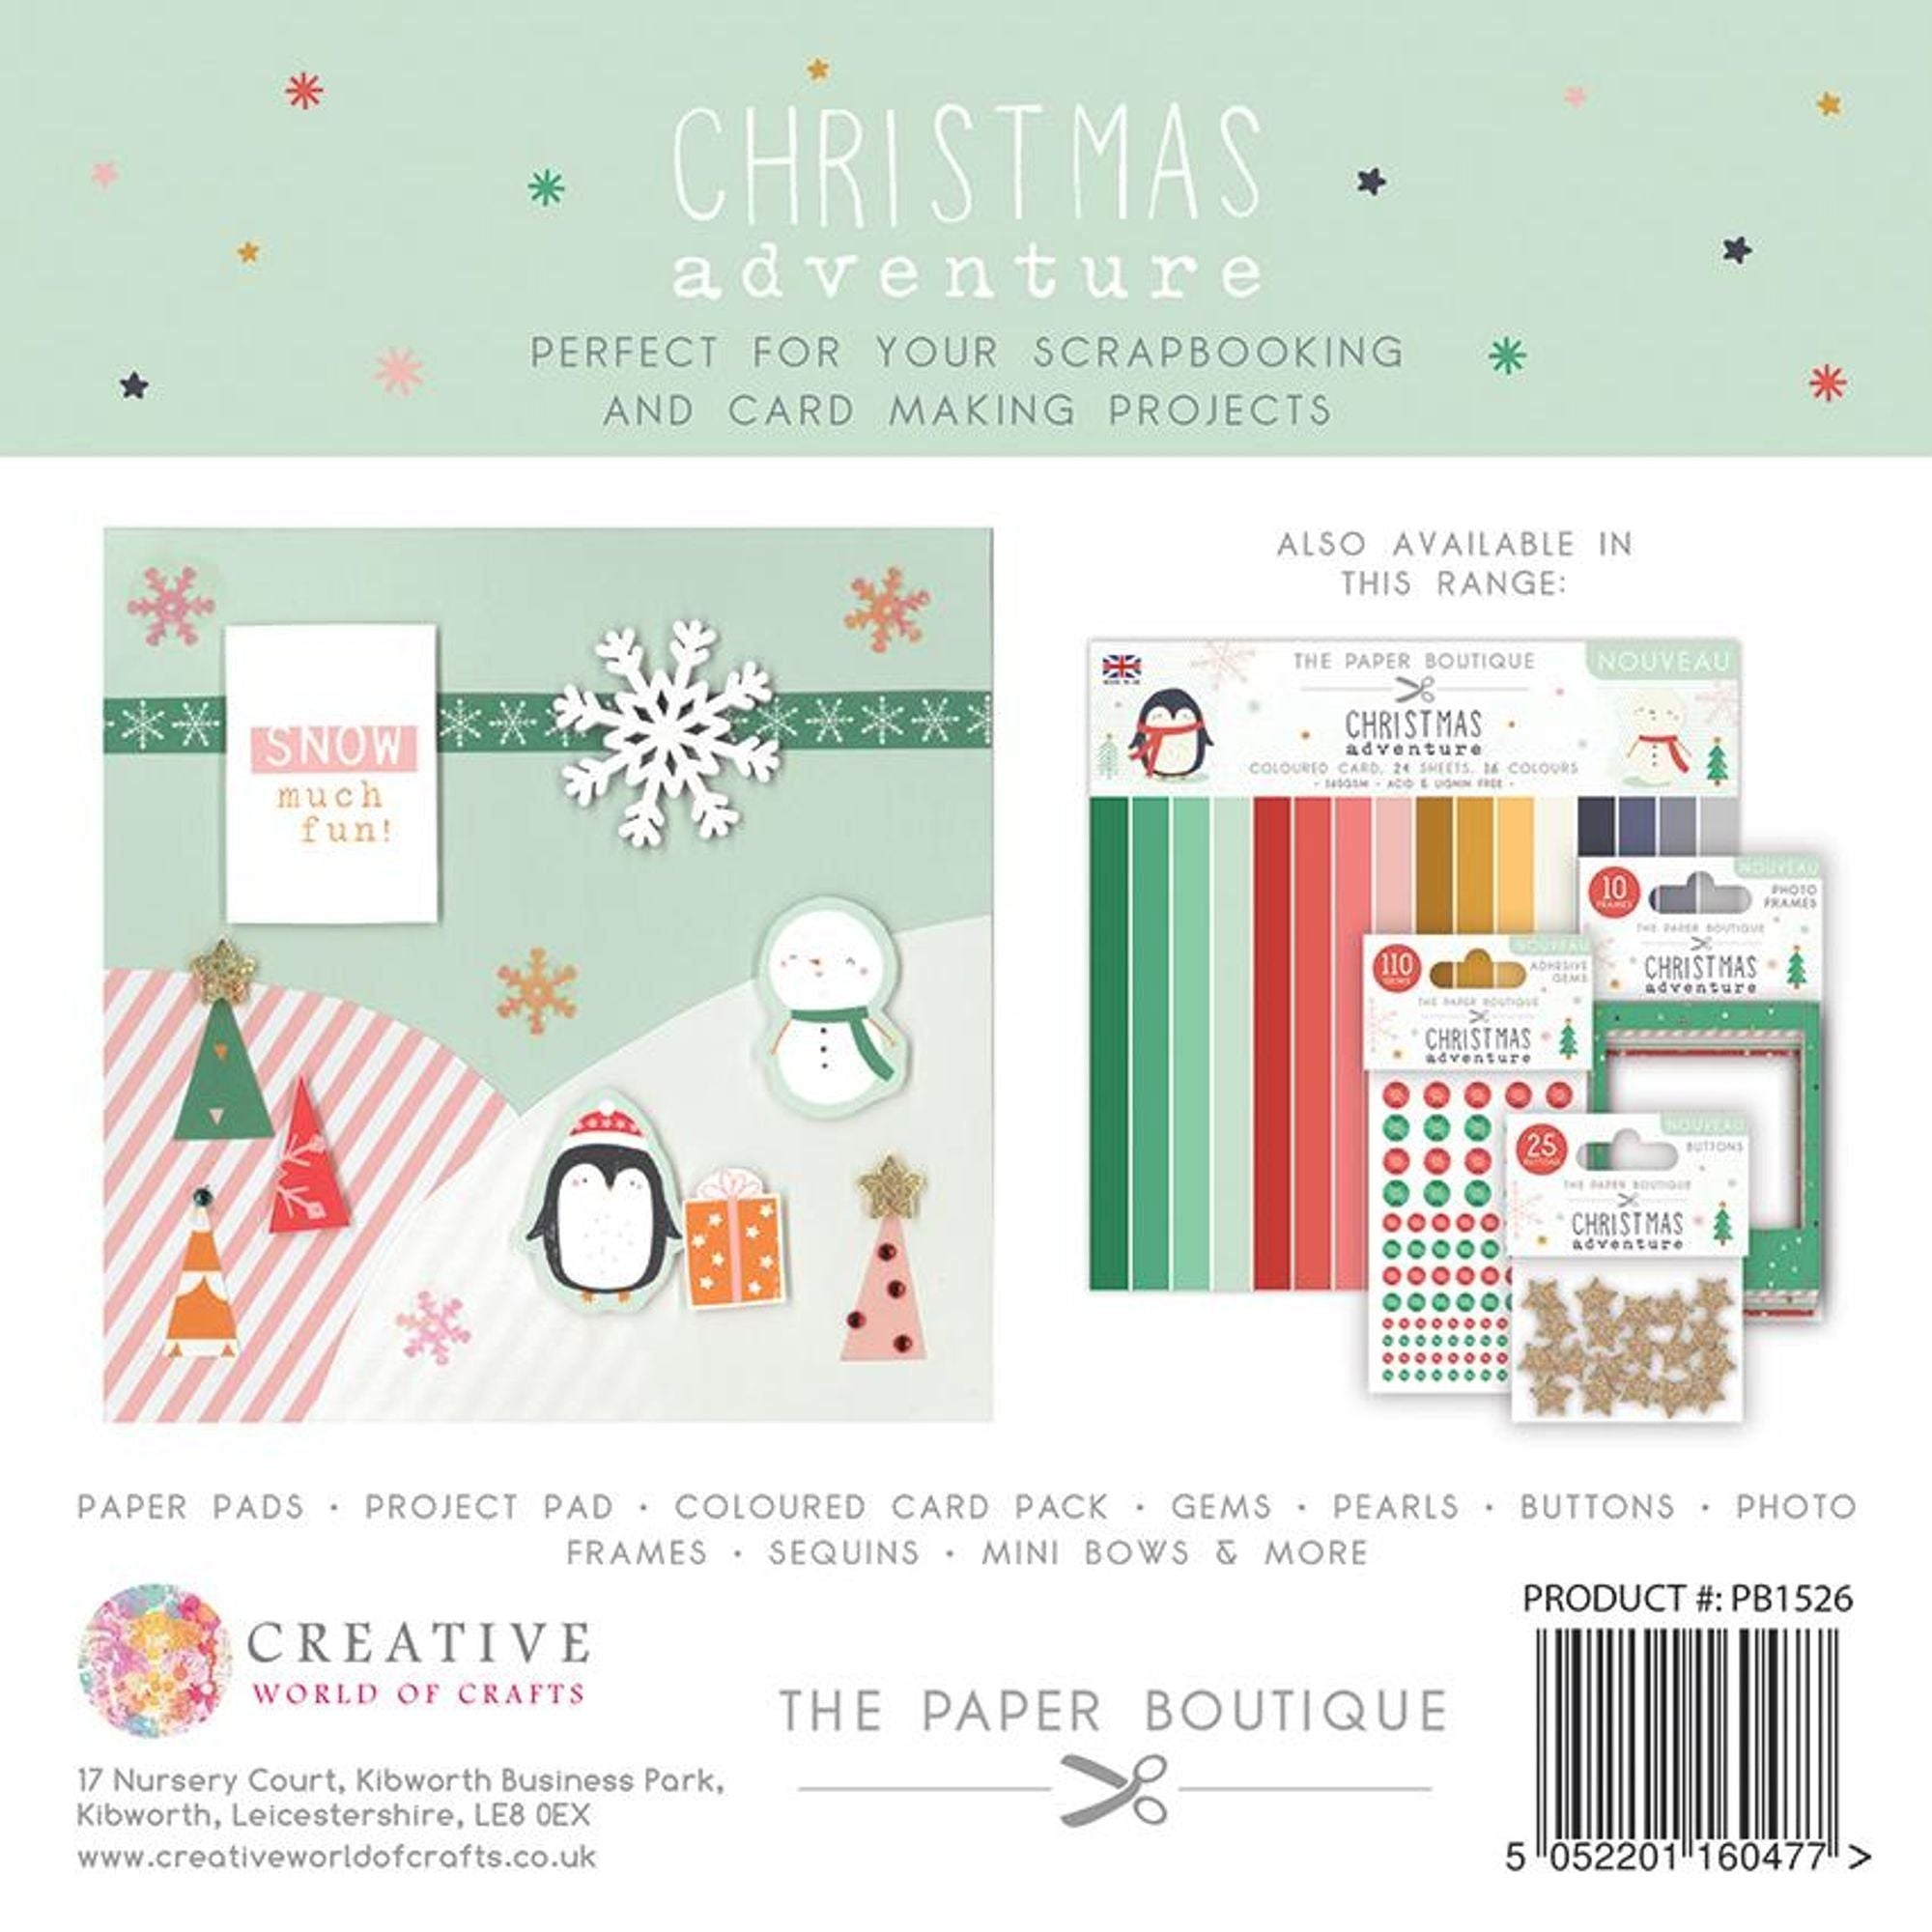 The Paper Boutique Christmas Adventure 8x8 Project Pad